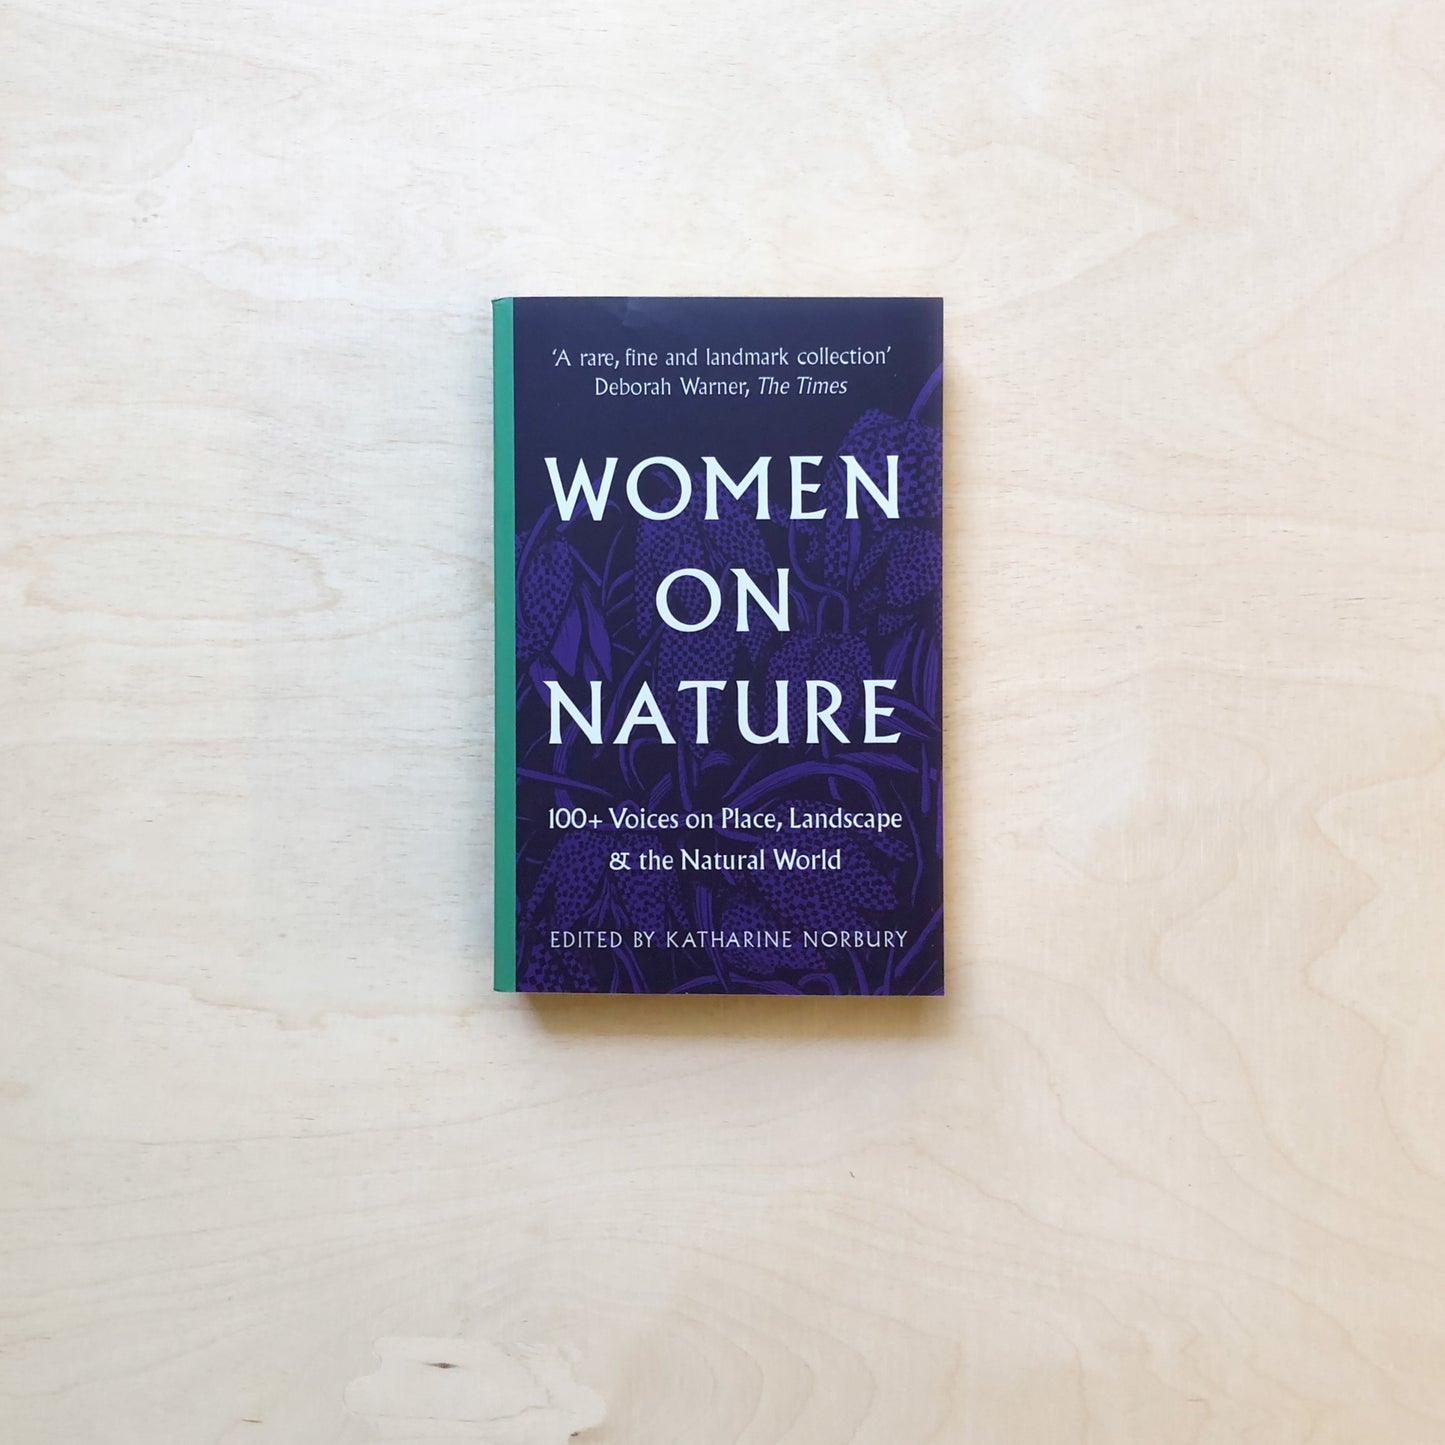 Women on Nature - 100+ Voices on Place, Landscape and the Natural World - Paperback